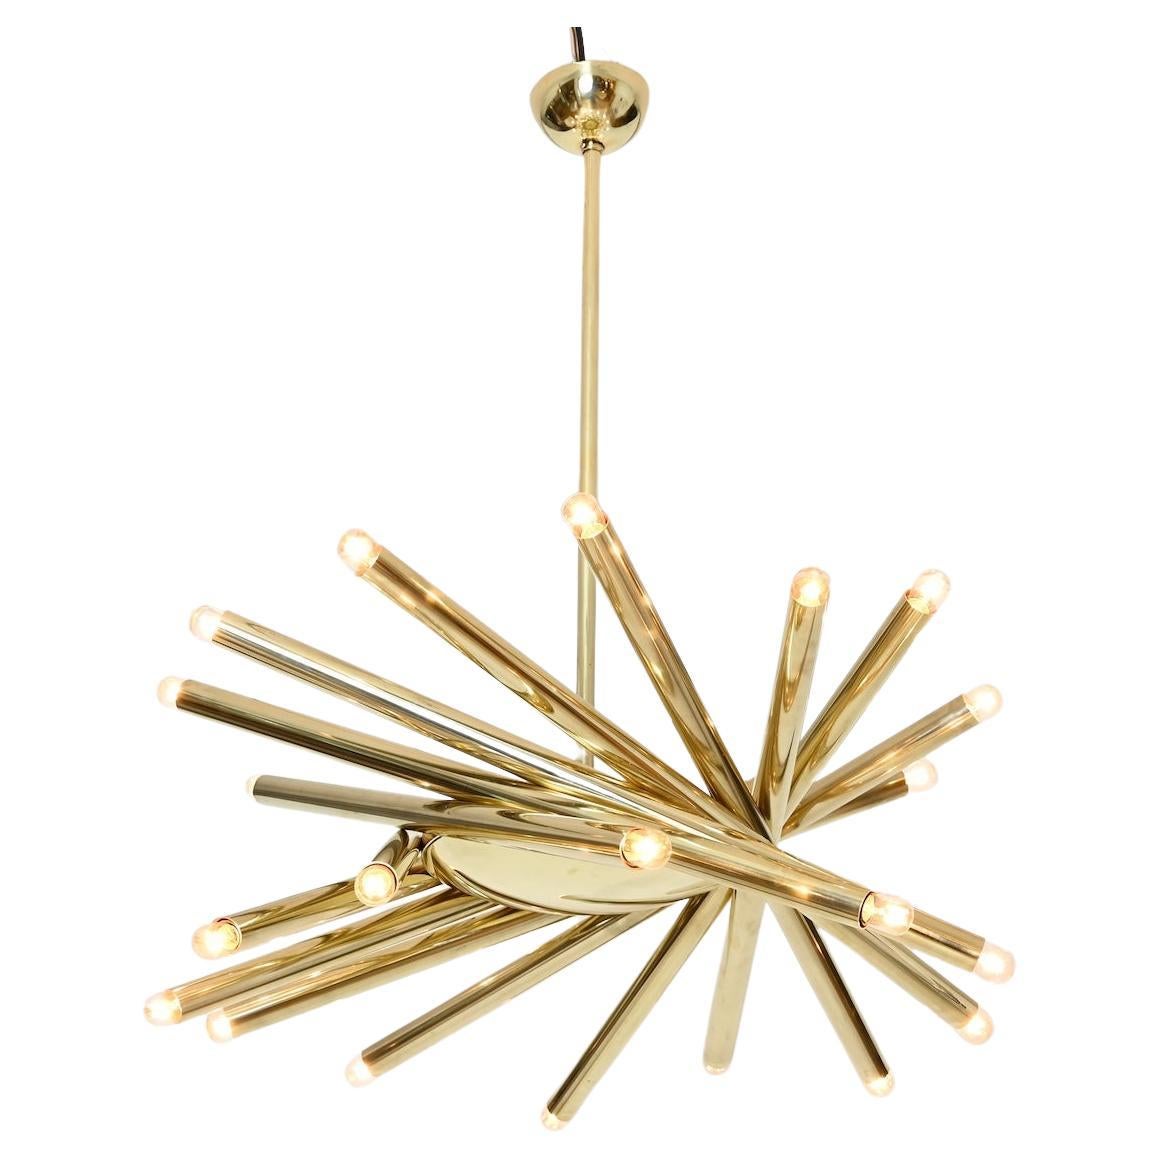 Impressive brass chandelier by Stilnovo, Milano Italy.

24 bulbs. 

Last picture shows smaller version of this fixture in Tamara Mellon's penthouse flat.